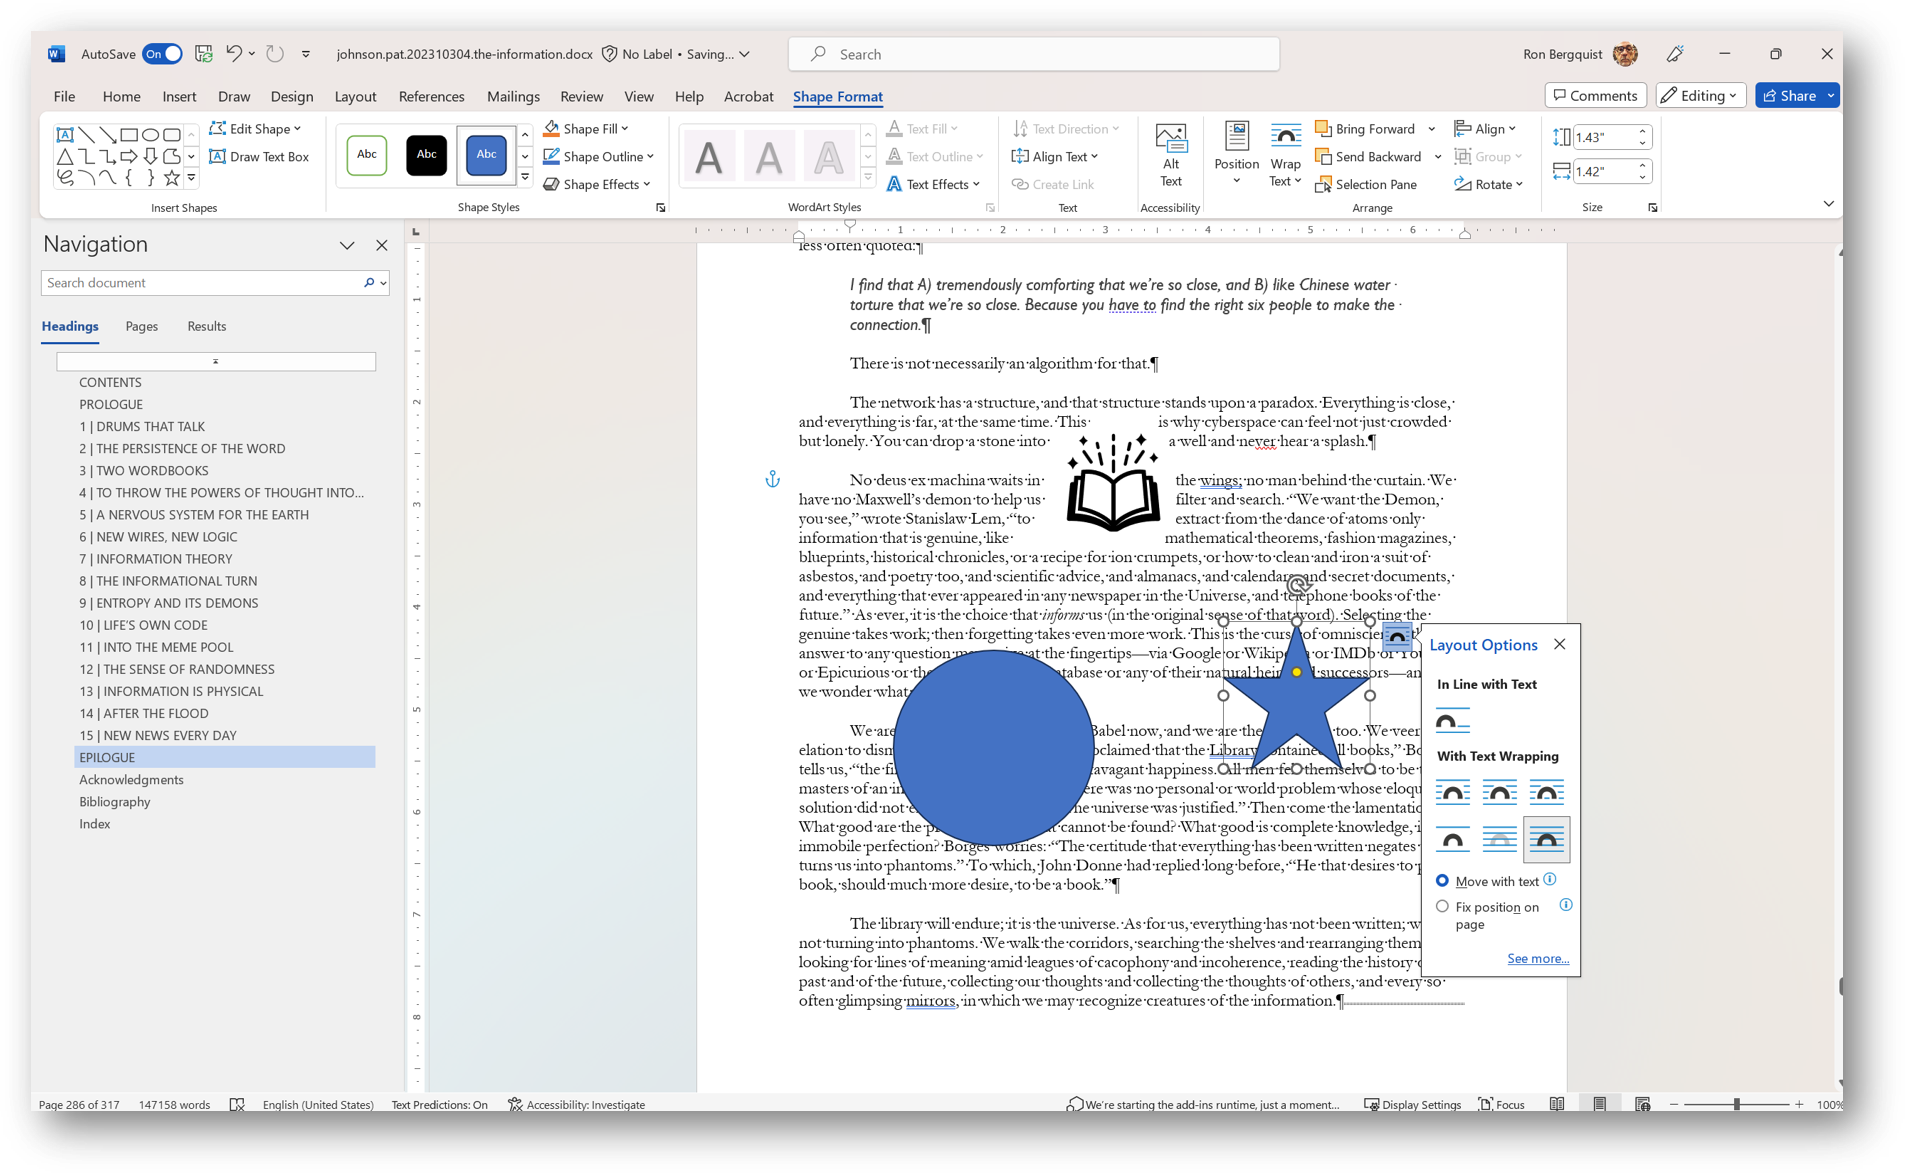 [MSWord 365 showing icon image inserted wrapped]